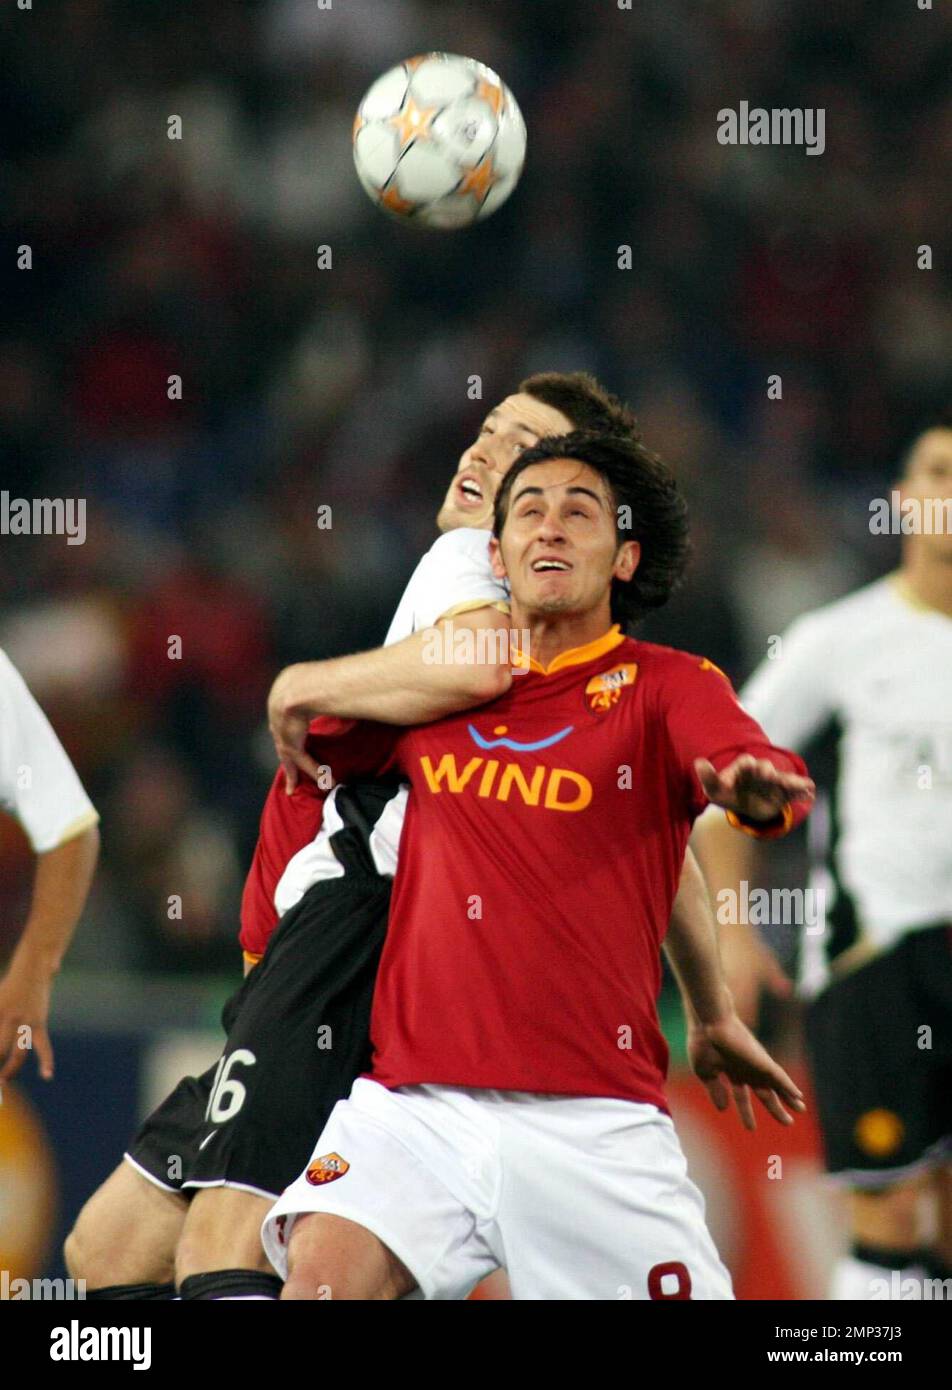 Roma Player Alberto Aquilani fight a ball with Carrick Michael during the match Roma-Manchester United for the 2008 Champions League quarterfinals in the Olympic Stadium. Roma loses the match 0-2. Rome, Italy. 4/1/08. Stock Photo